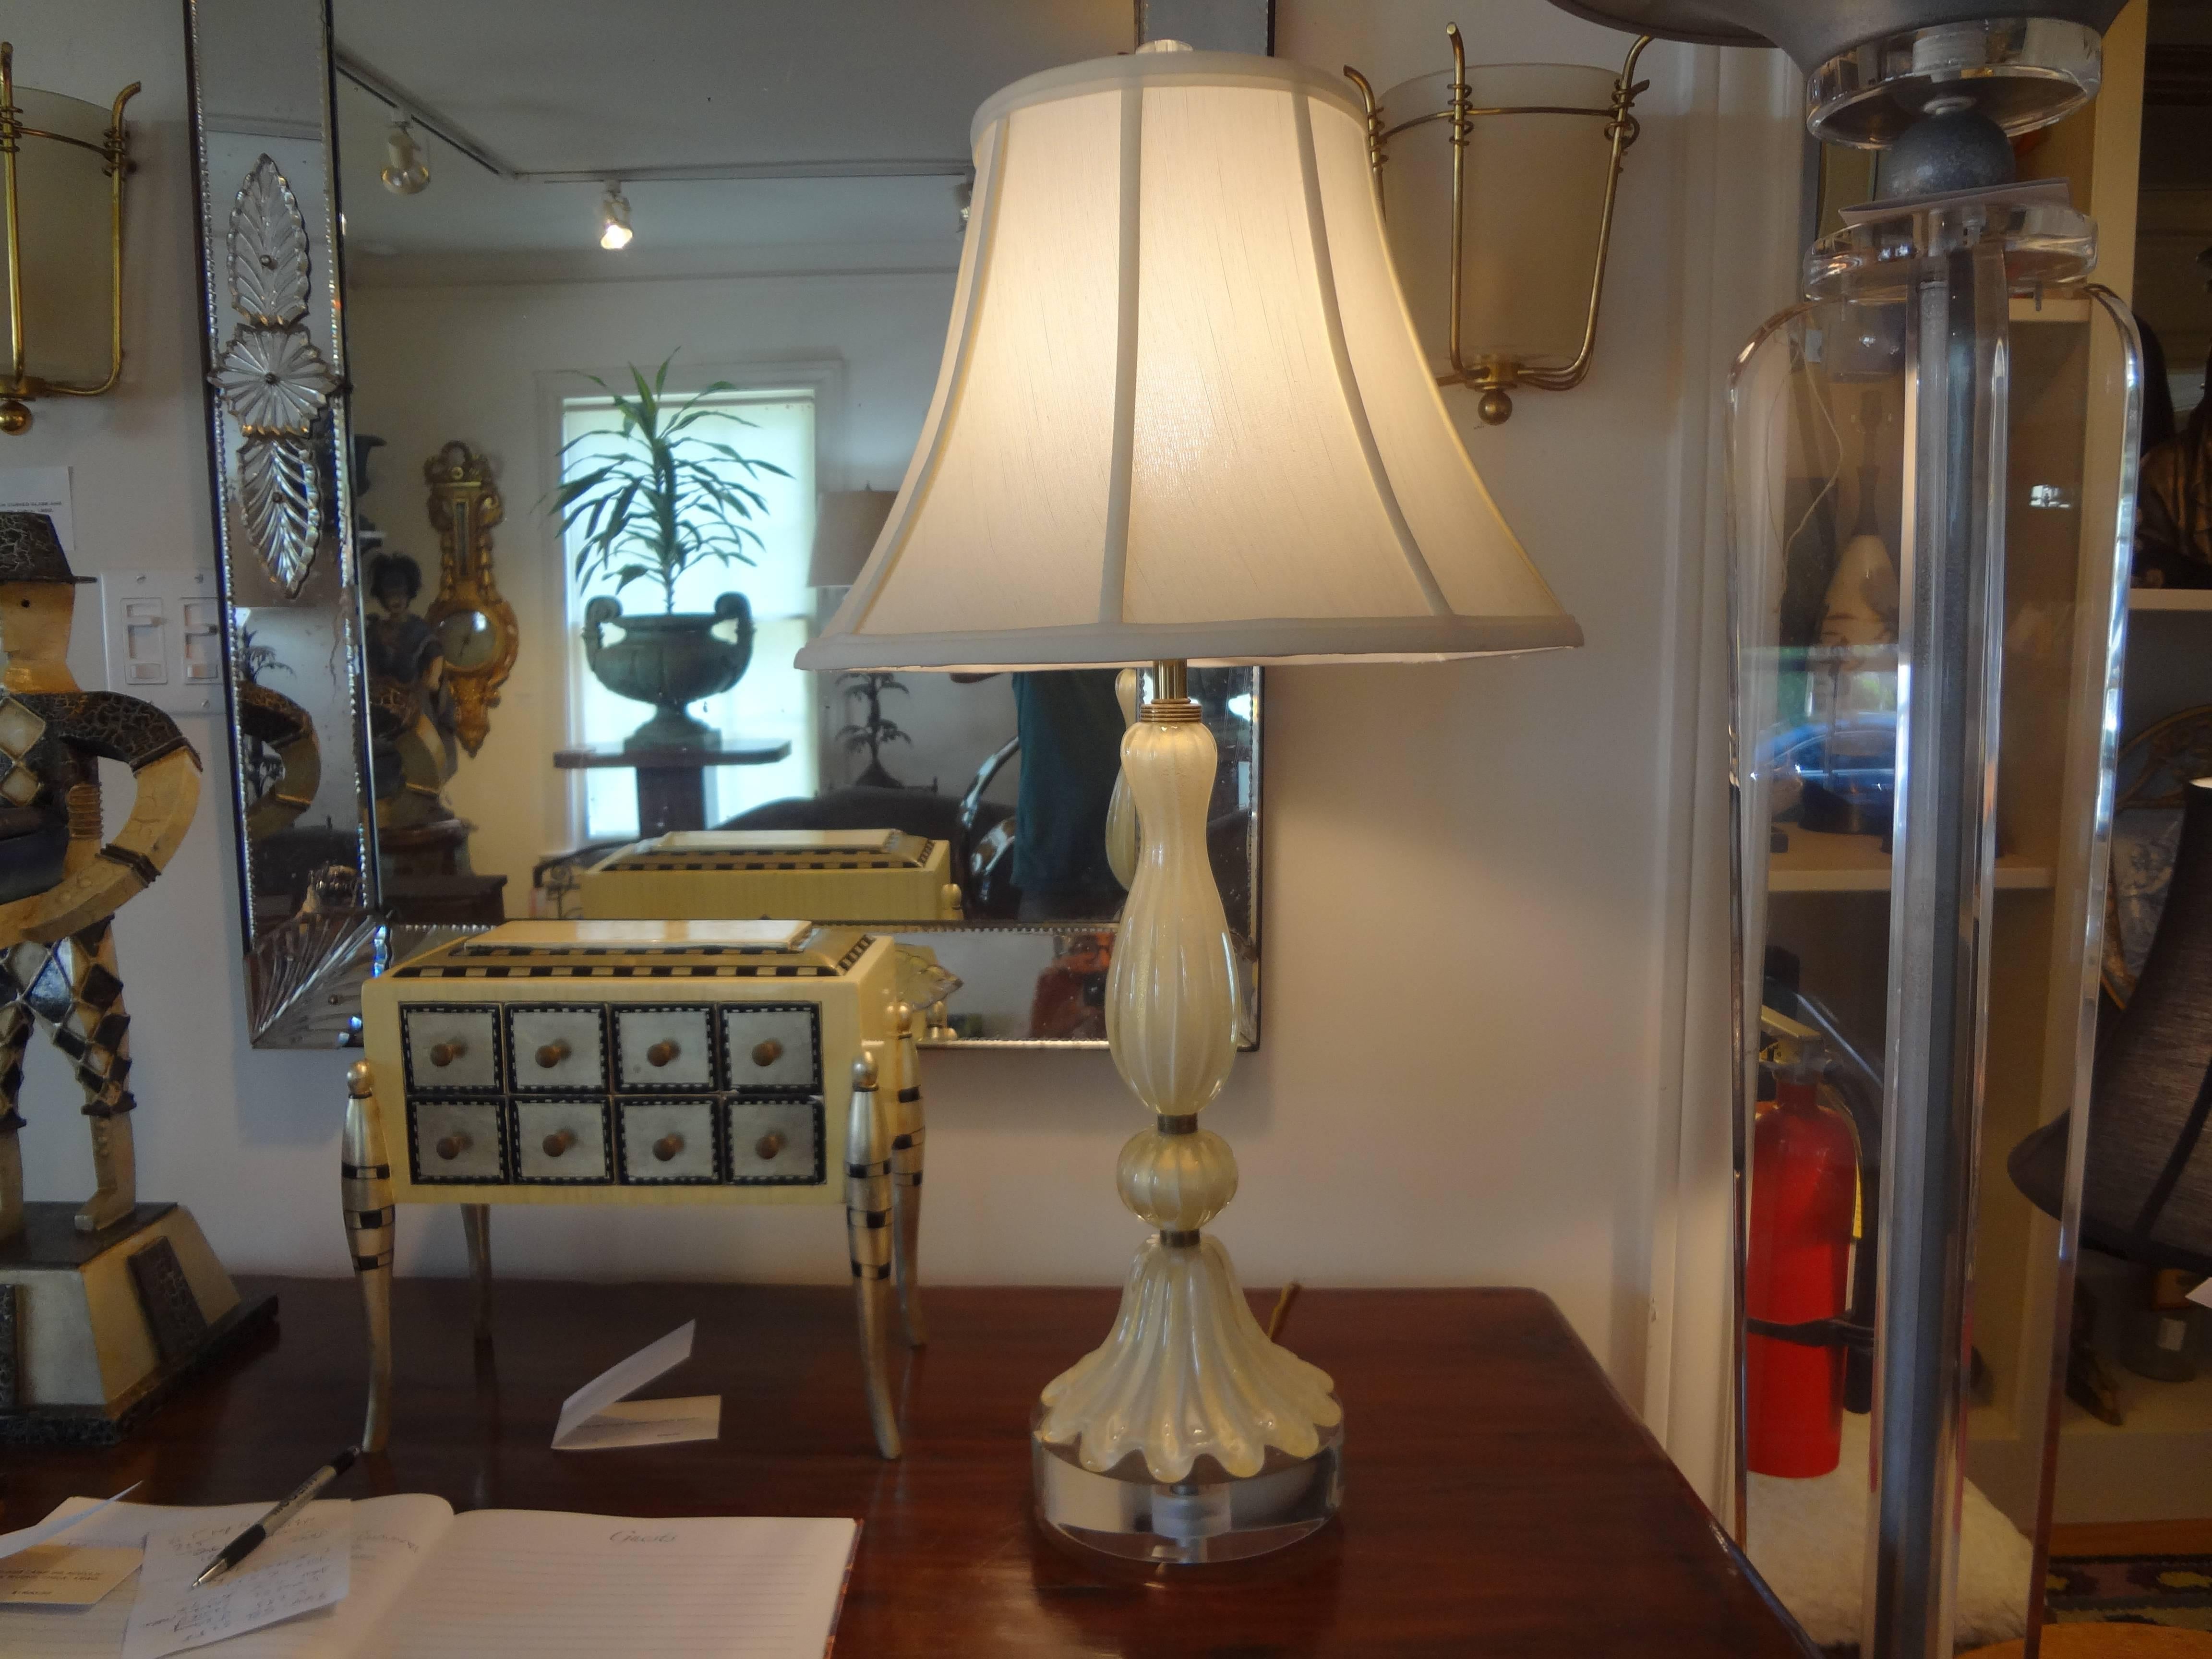 Murano glass lamp attributed to Barovier.
Vintage Italian Murano glass lamp on lucite or acrylic base attributed to Barovier. This Venetian glass lamp is cream colored glass infused with gold with brass accents. Our classic Murano glass lamp has